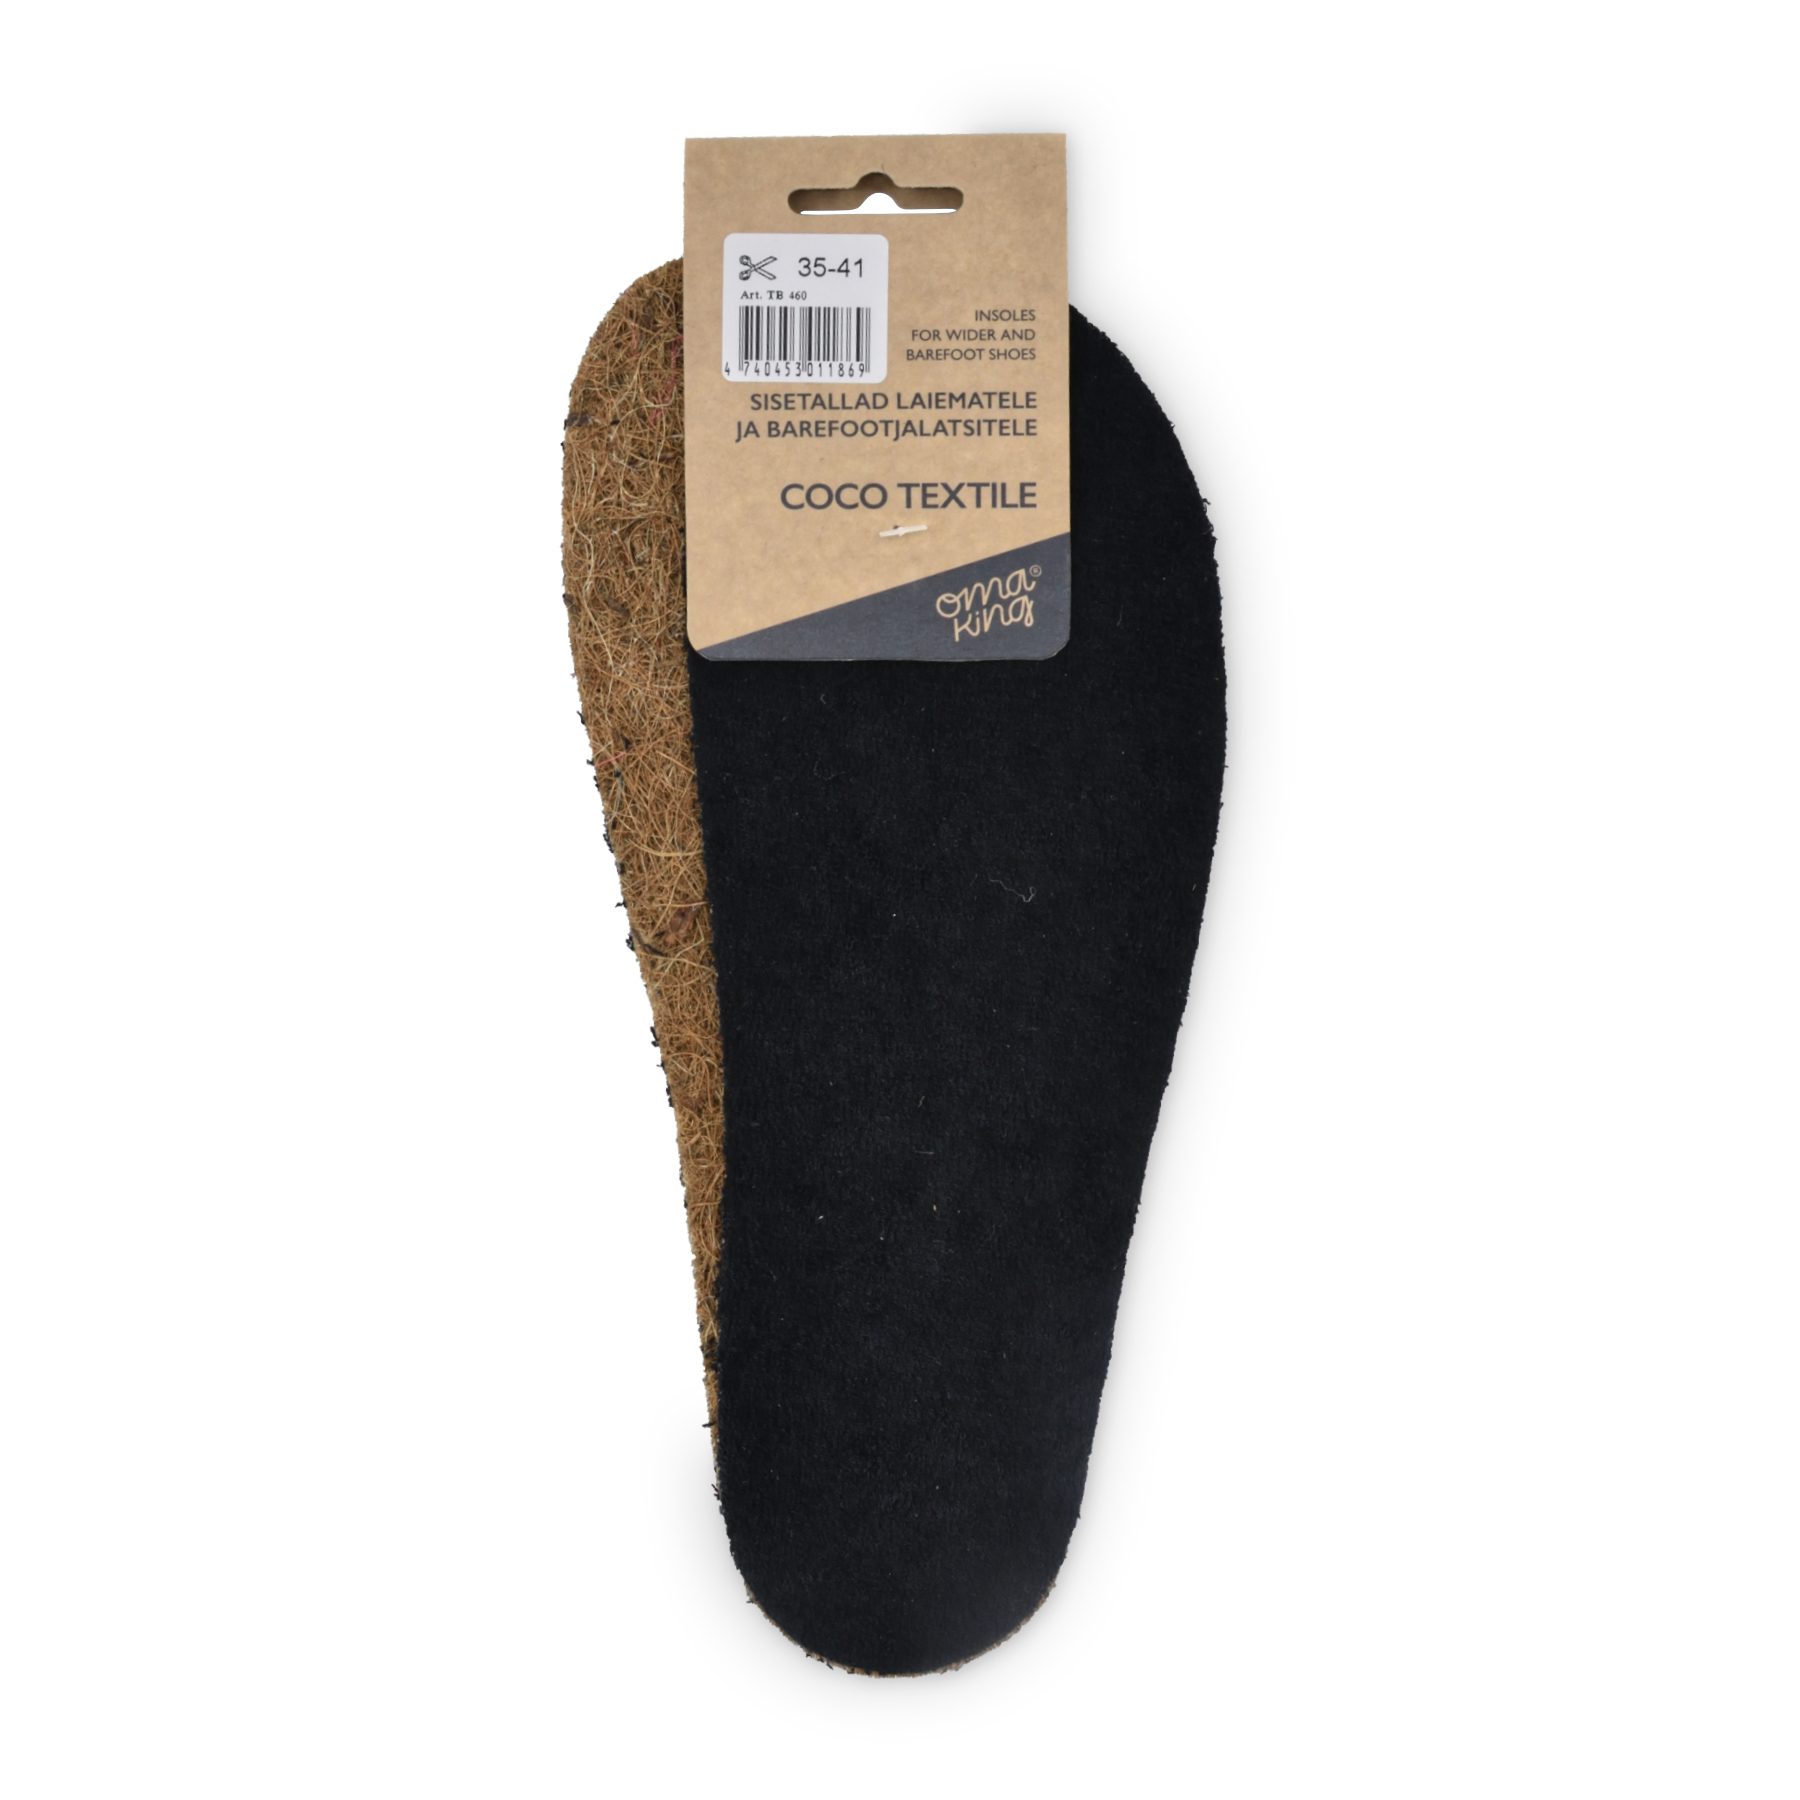 OmaKing insoles Coco Textile